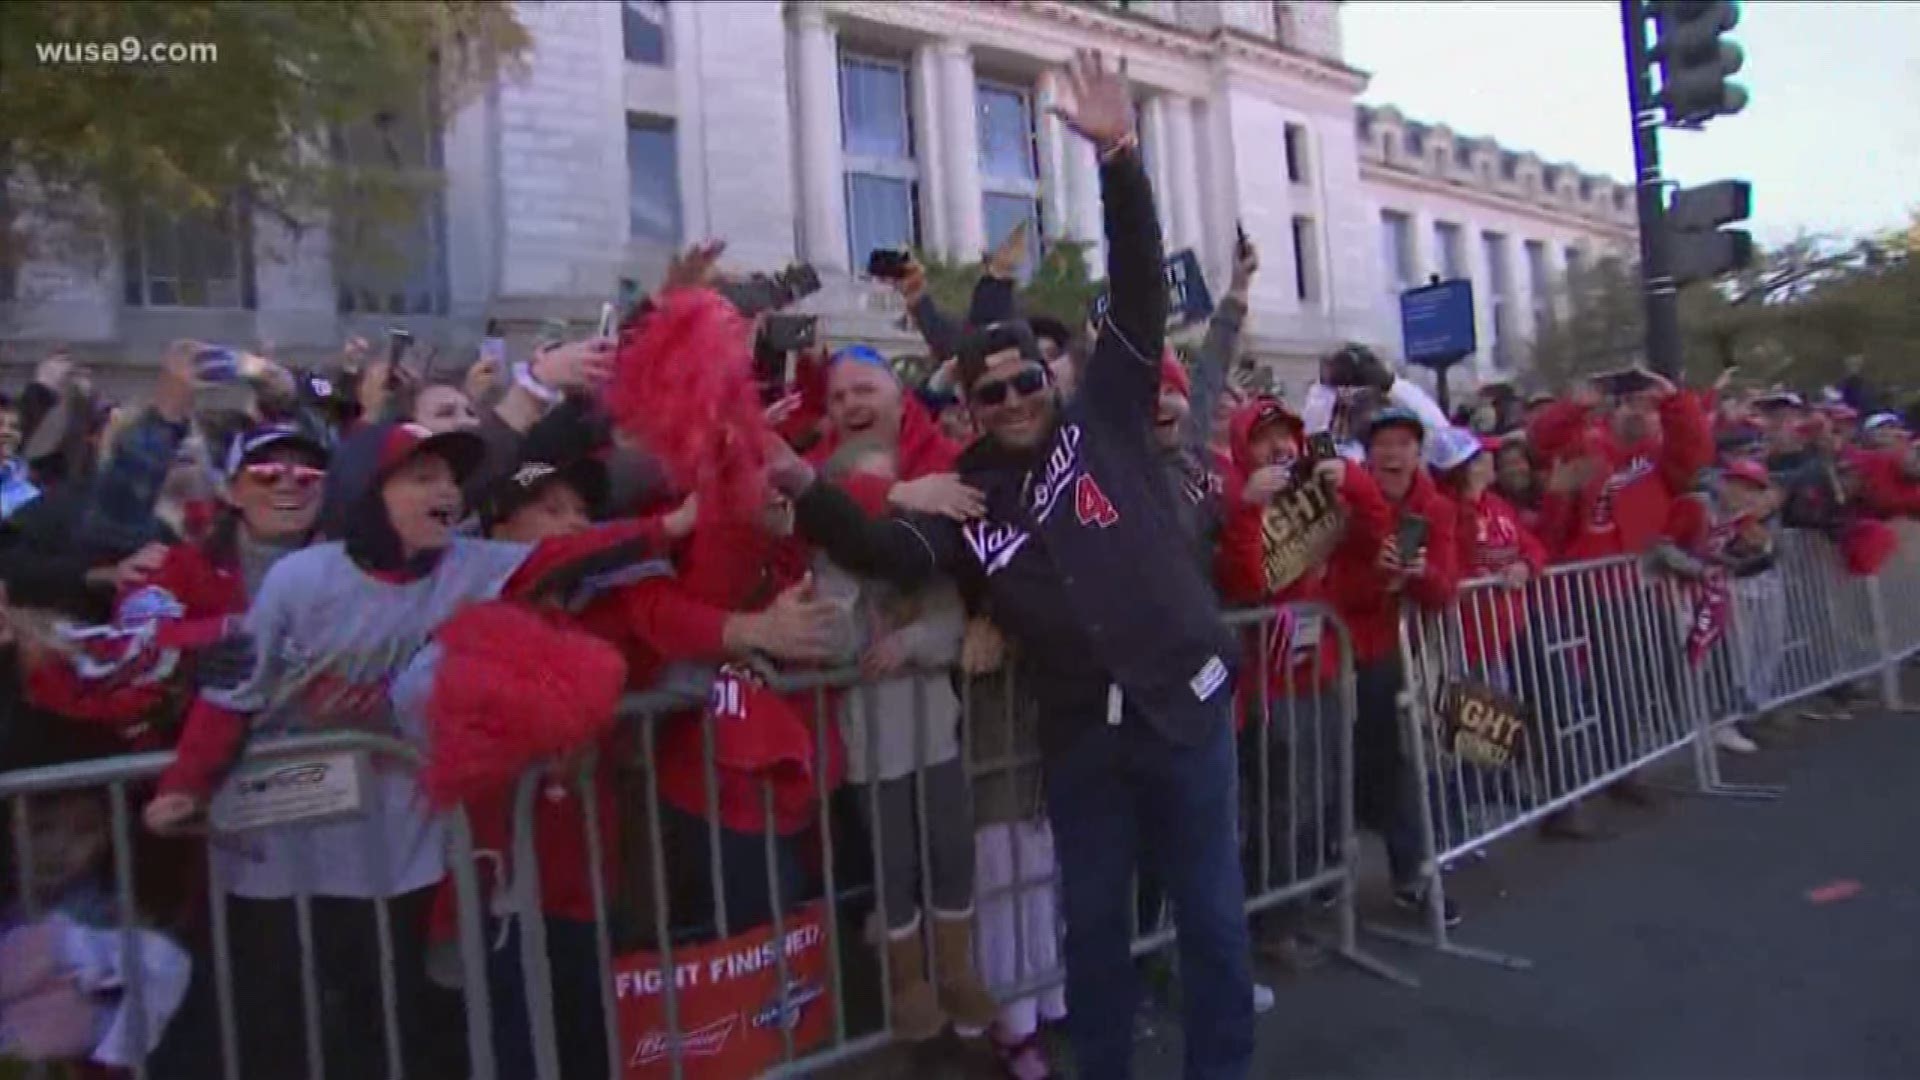 Washington Nationals manager, Davey Martinez celebrates with fans and Mike Rizzo allows fans to touch trophy